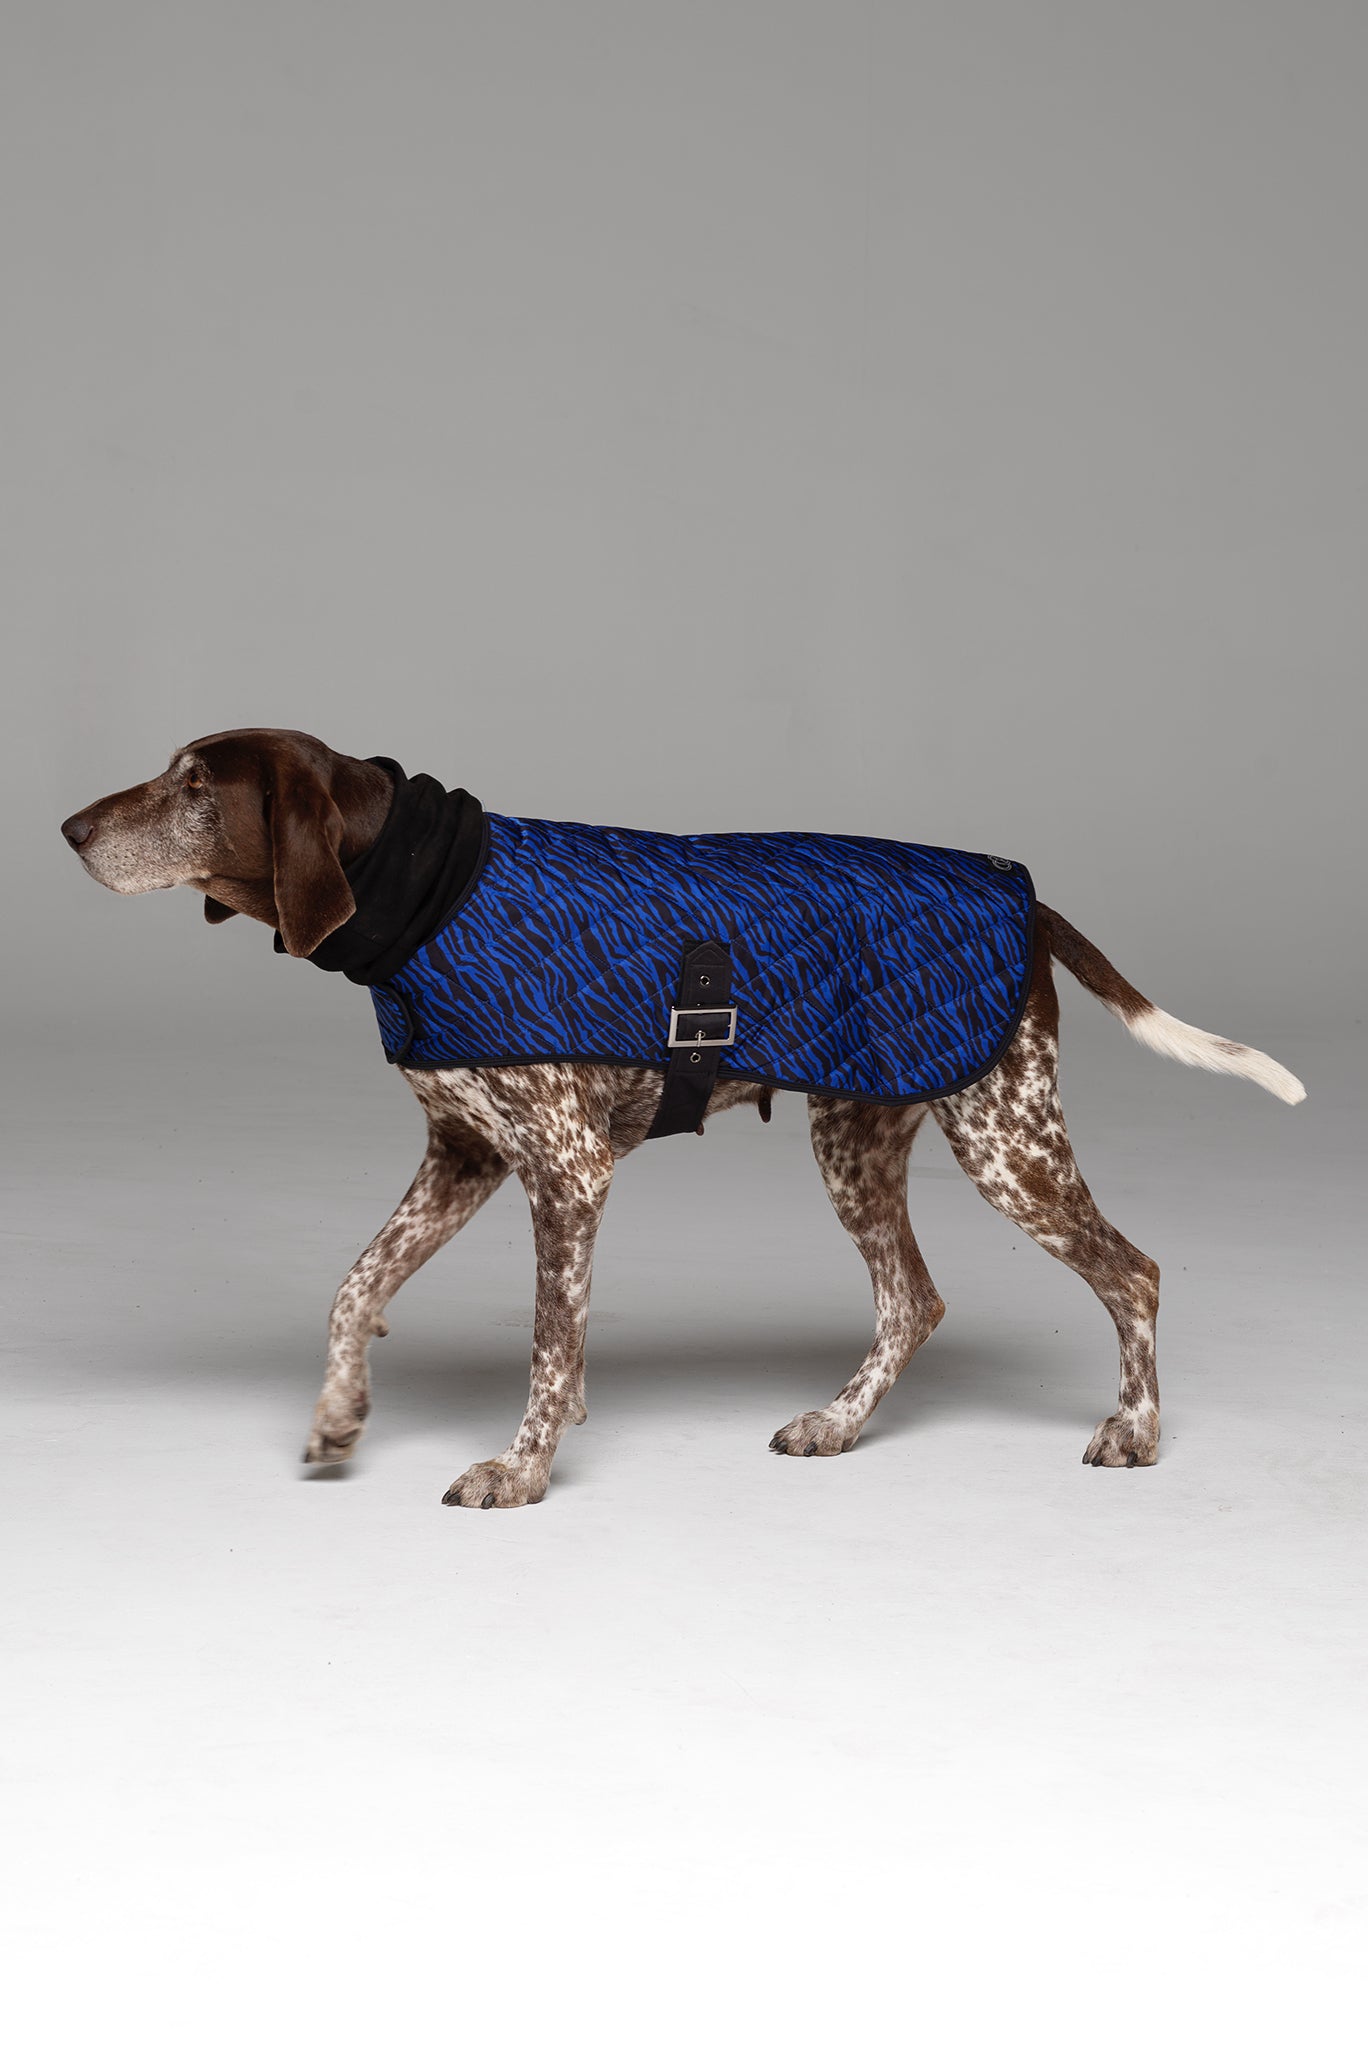 Side profile of Liberbarkce Dog Coat in Blue Zebra showing buckle closure and length of jacket which extends to the tail.